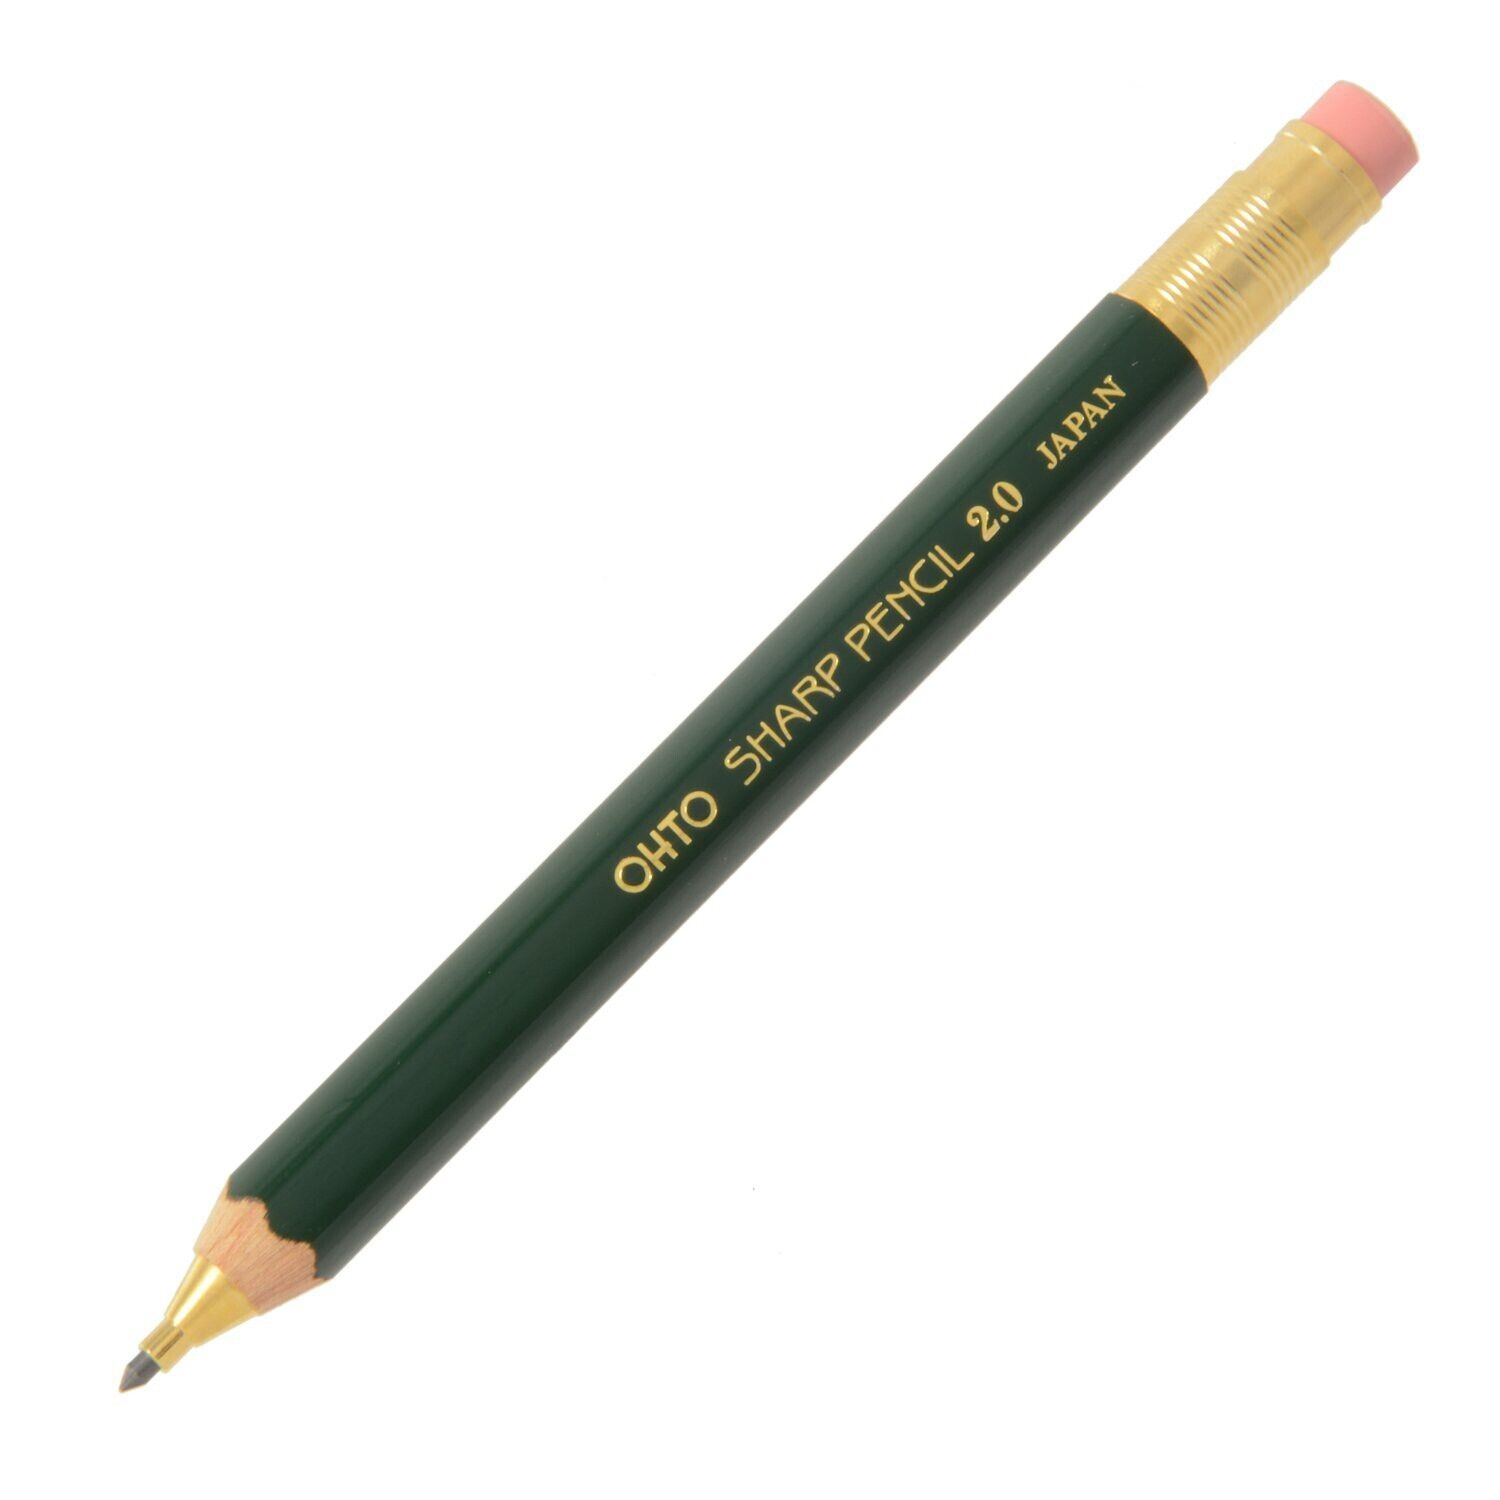 OHTO Mechanical Pencil Wood Sharp with Eraser 2.0, 2.0mm, Green Body (APS-680...